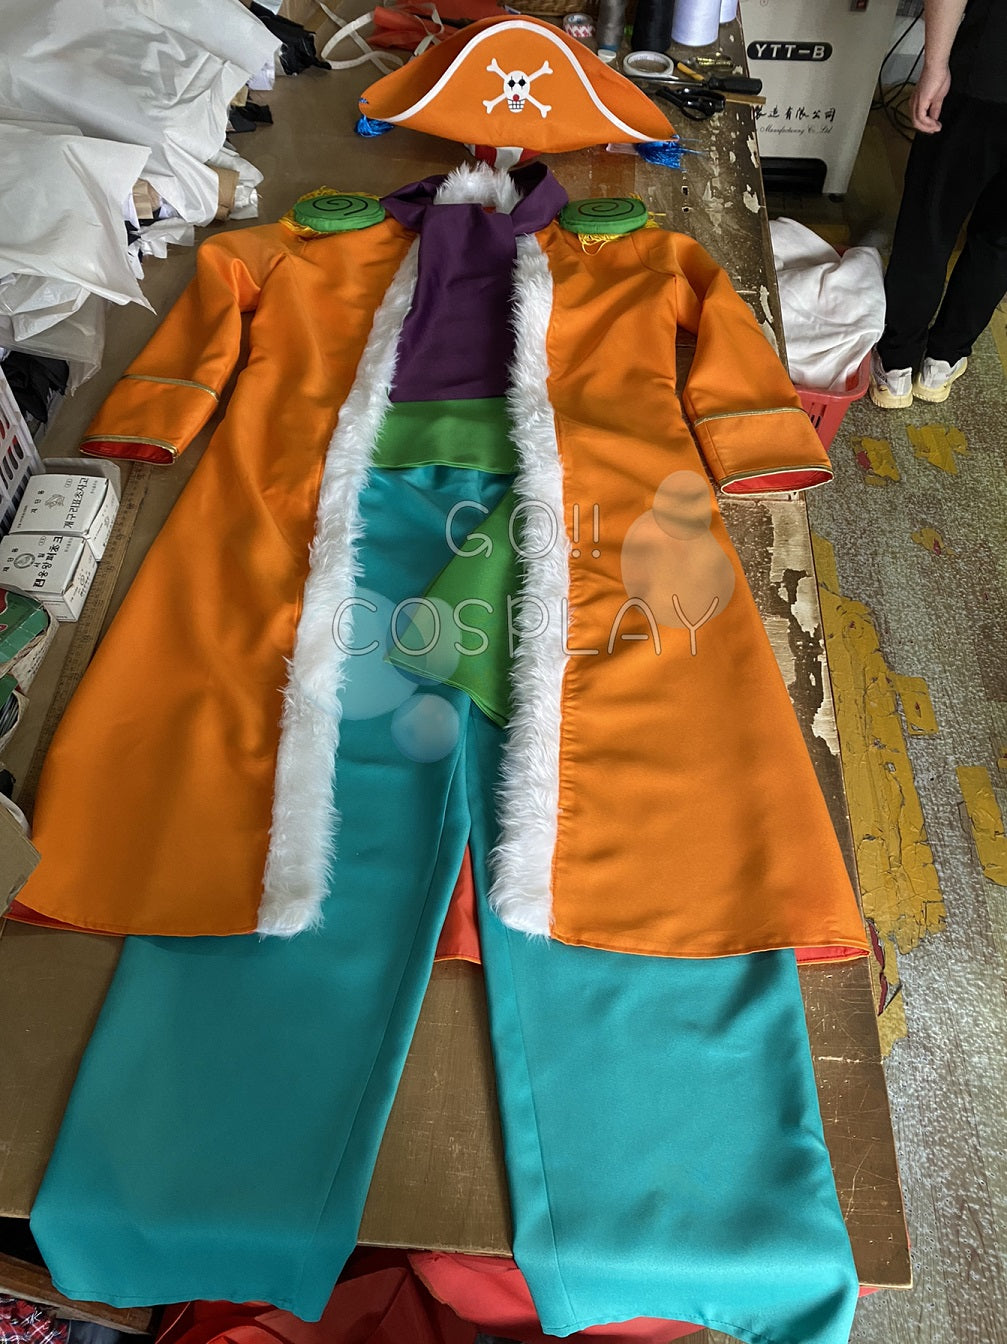 Buggy the Clown Cosplay Buy